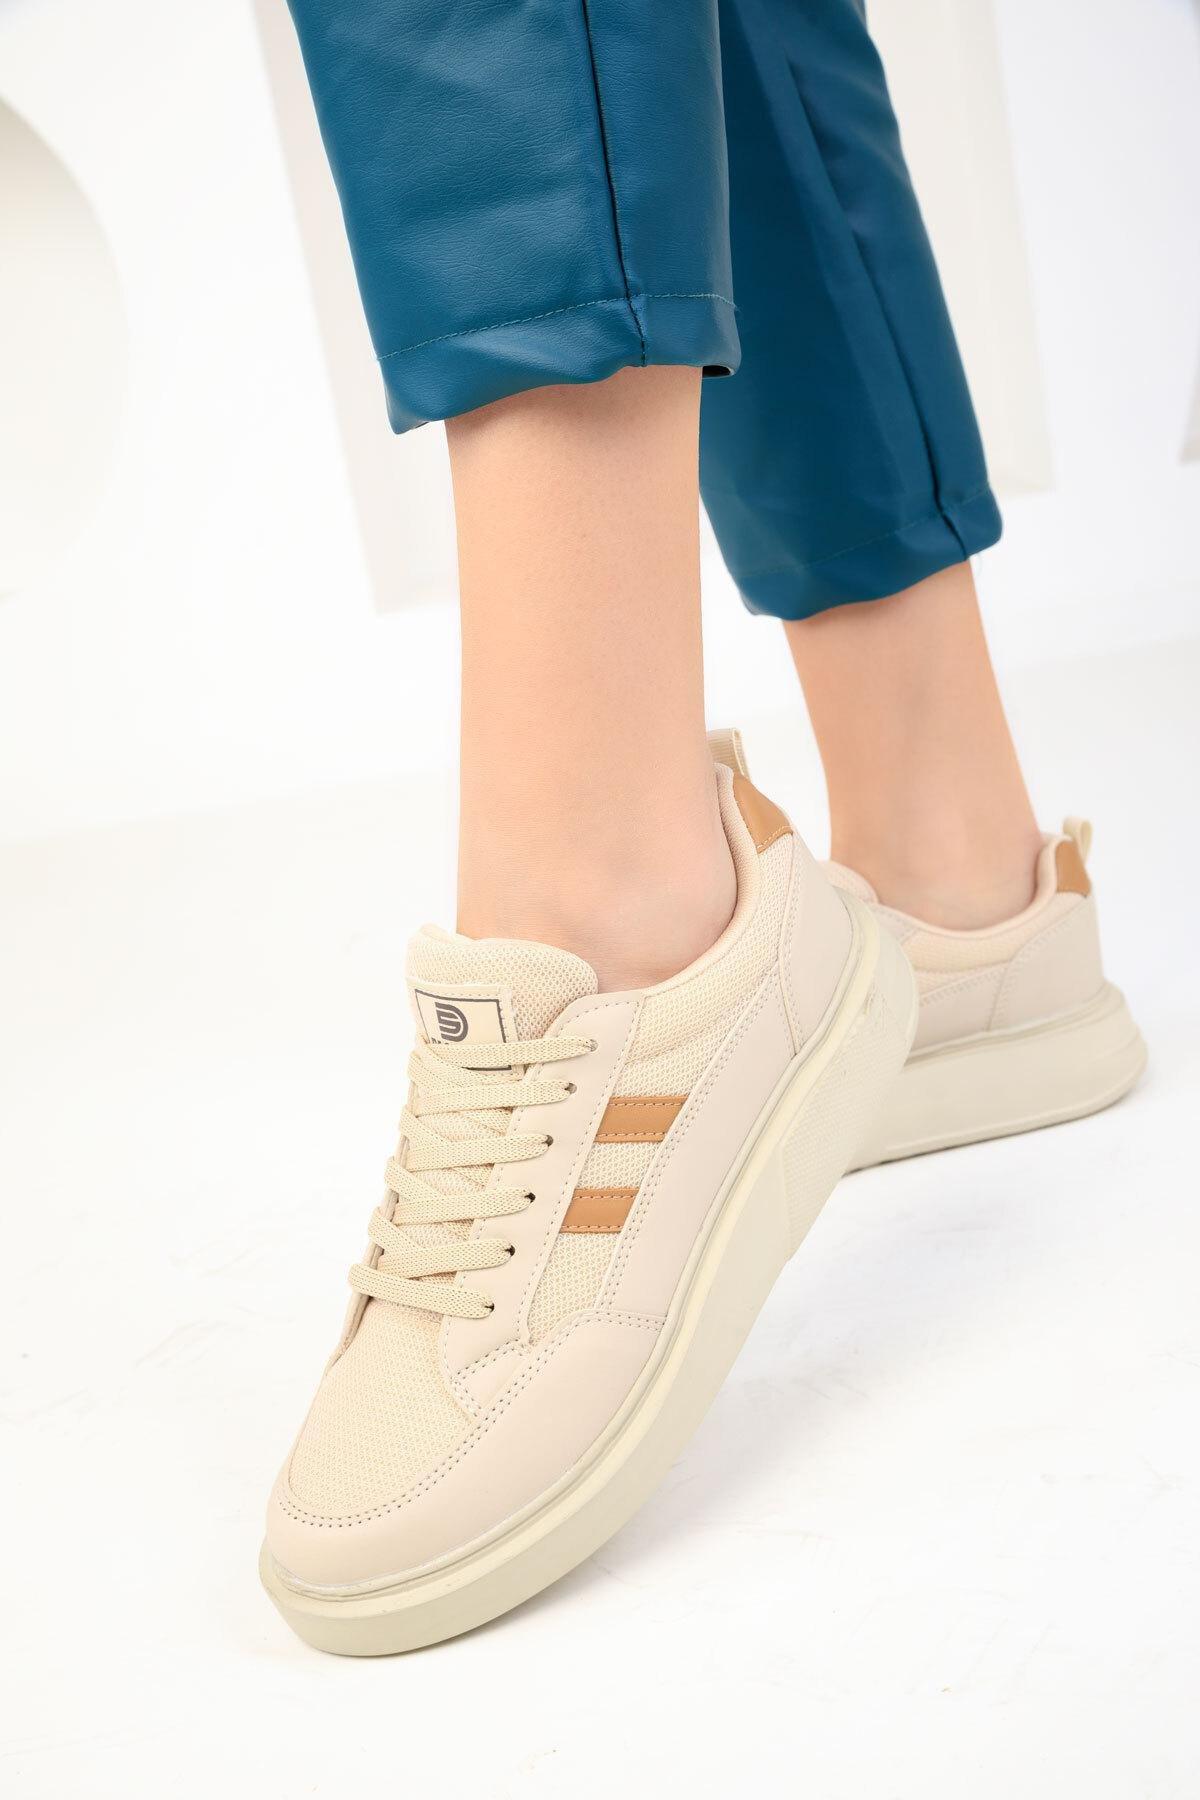 SOHO - Beige Lace-Up Sneakers